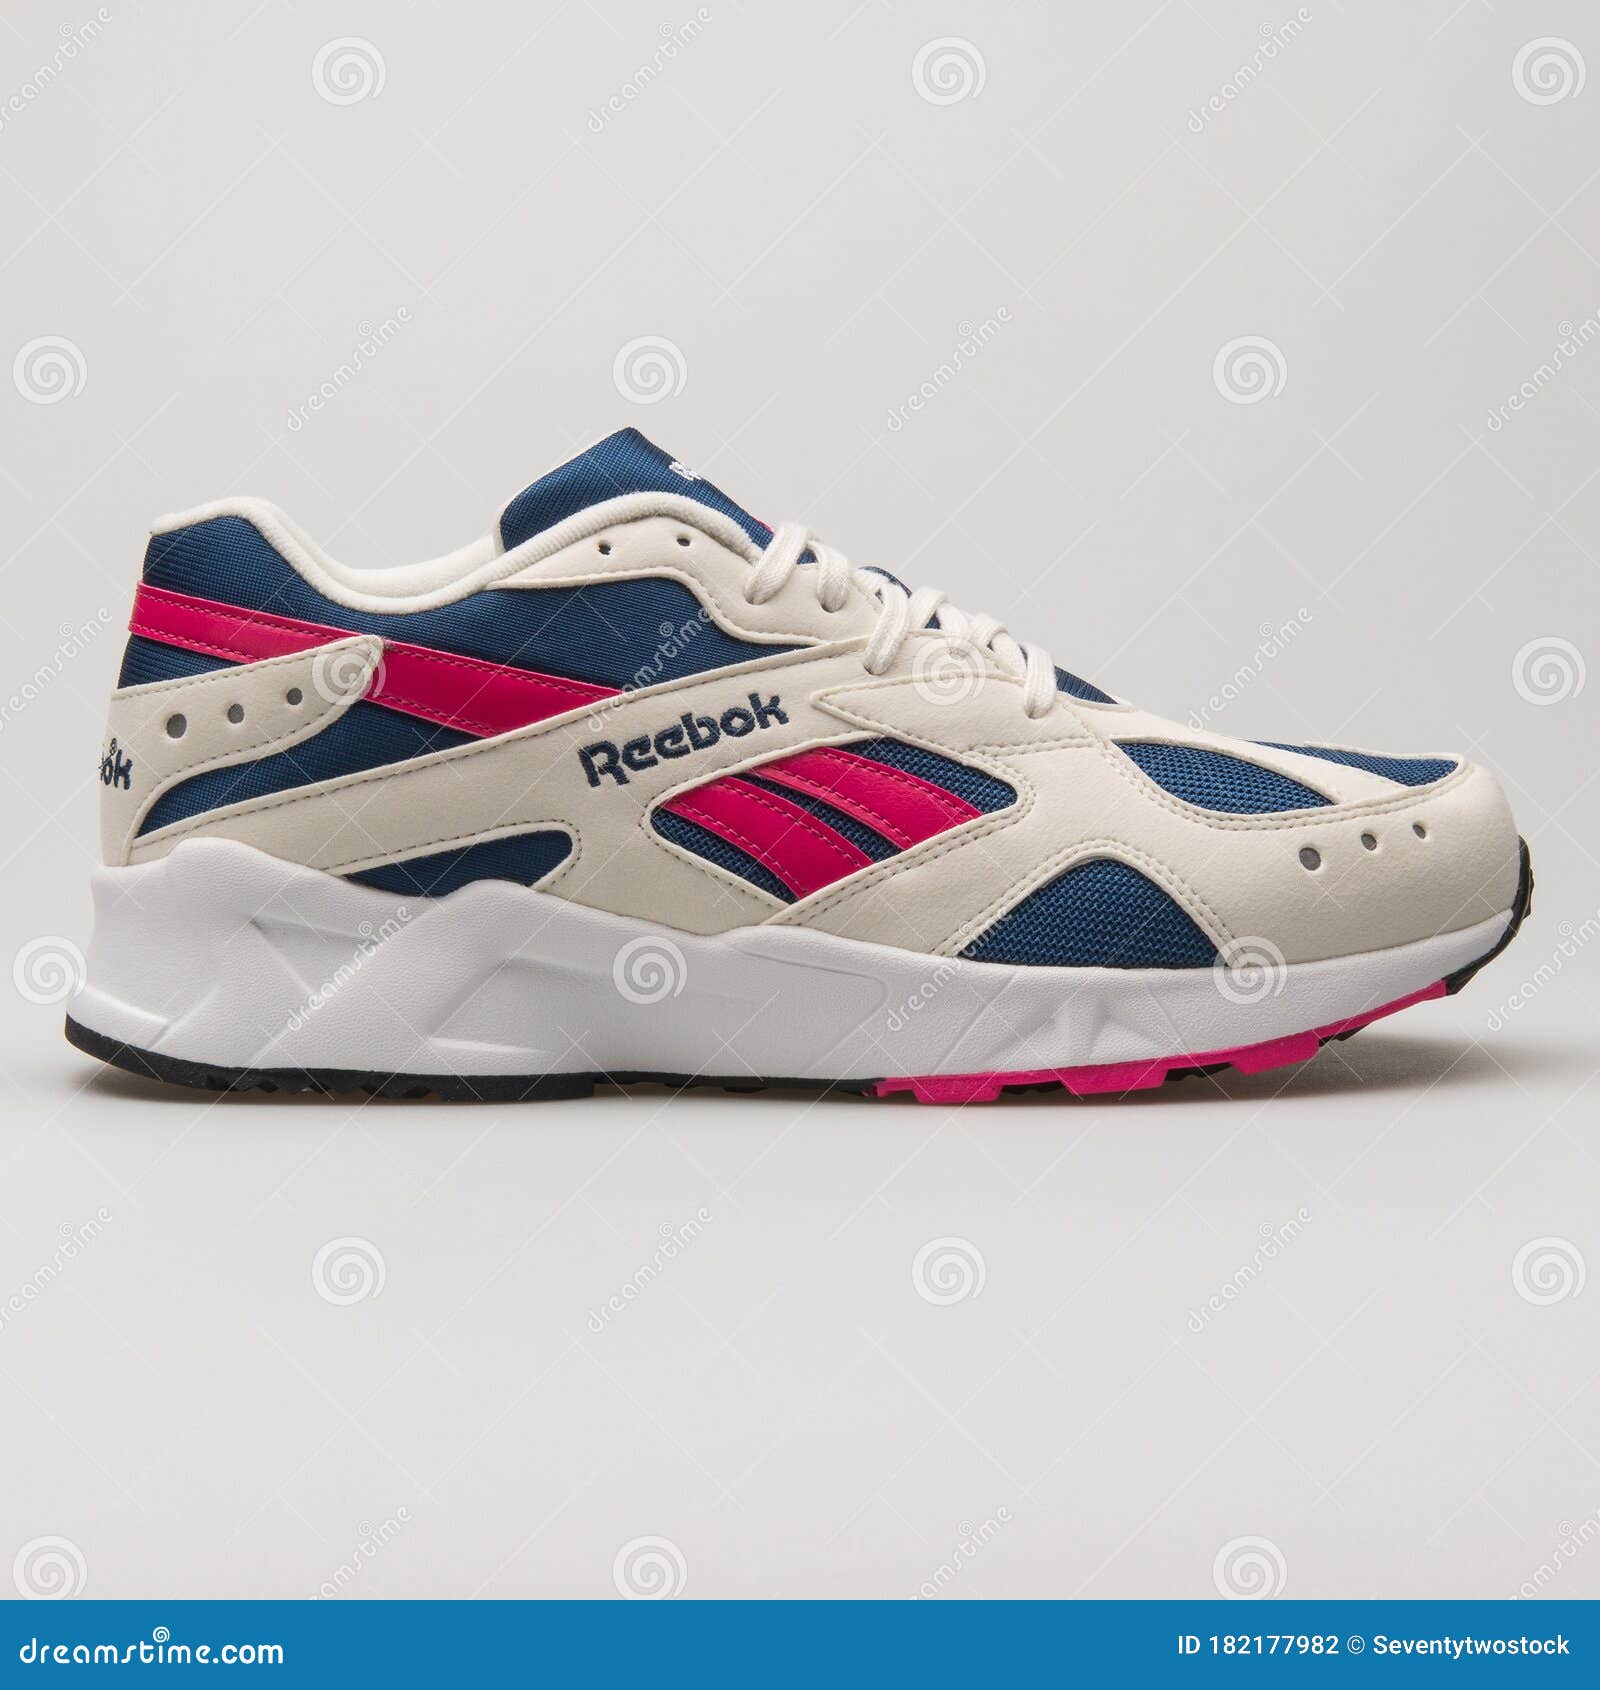 Reebok Aztrek Beige, Navy Blue, Pink and White Sneaker Editorial Photography - of product, pink: 182177982